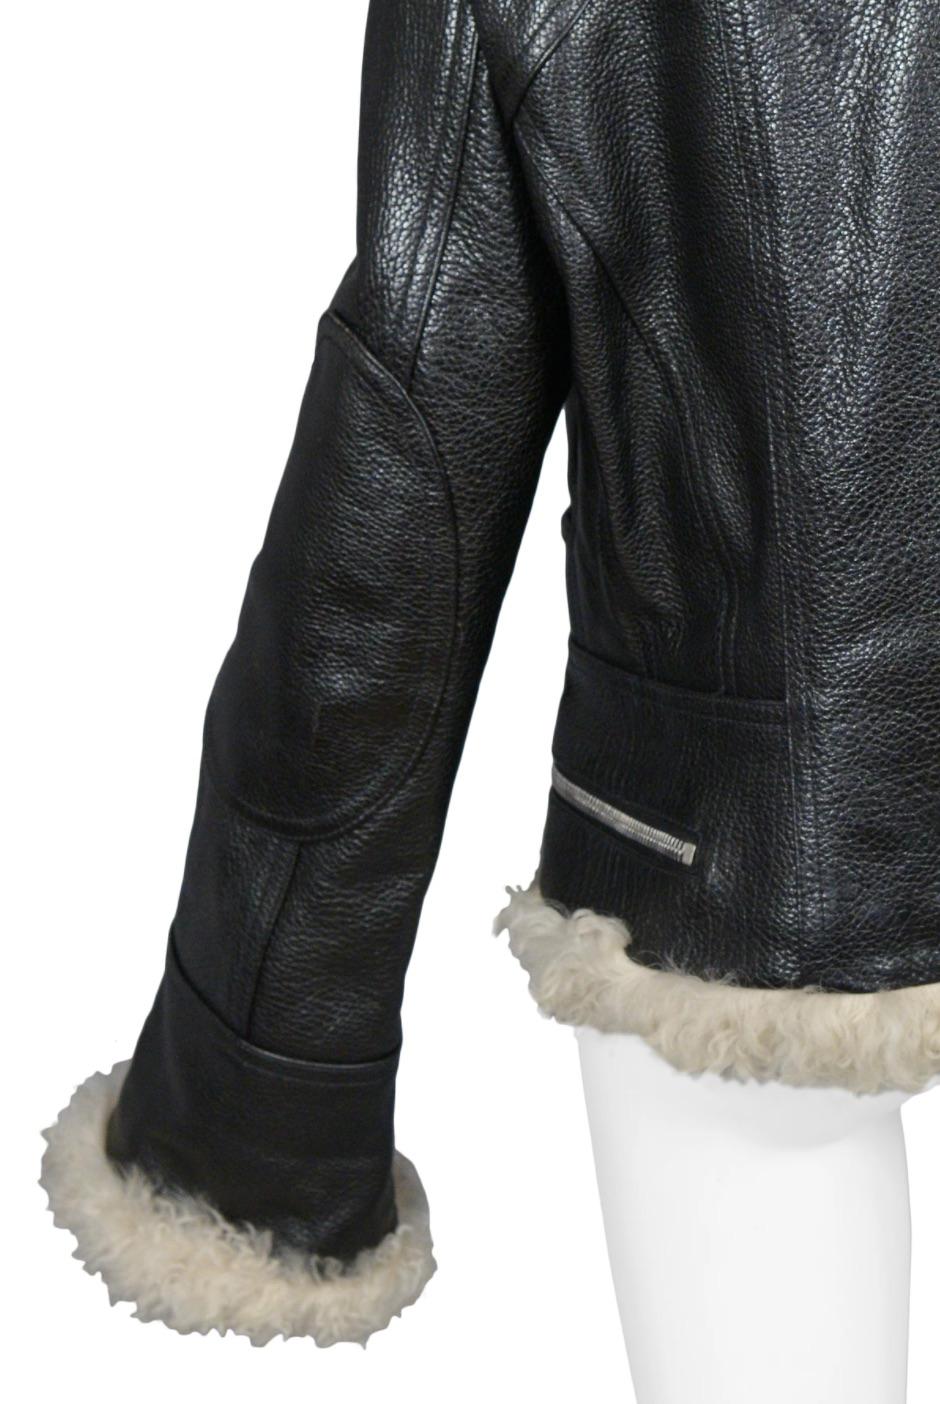 Balenciaga by Nicolas Ghesquiere AW 2004 Leather & Shearling Moto Jacket In Excellent Condition In Los Angeles, CA